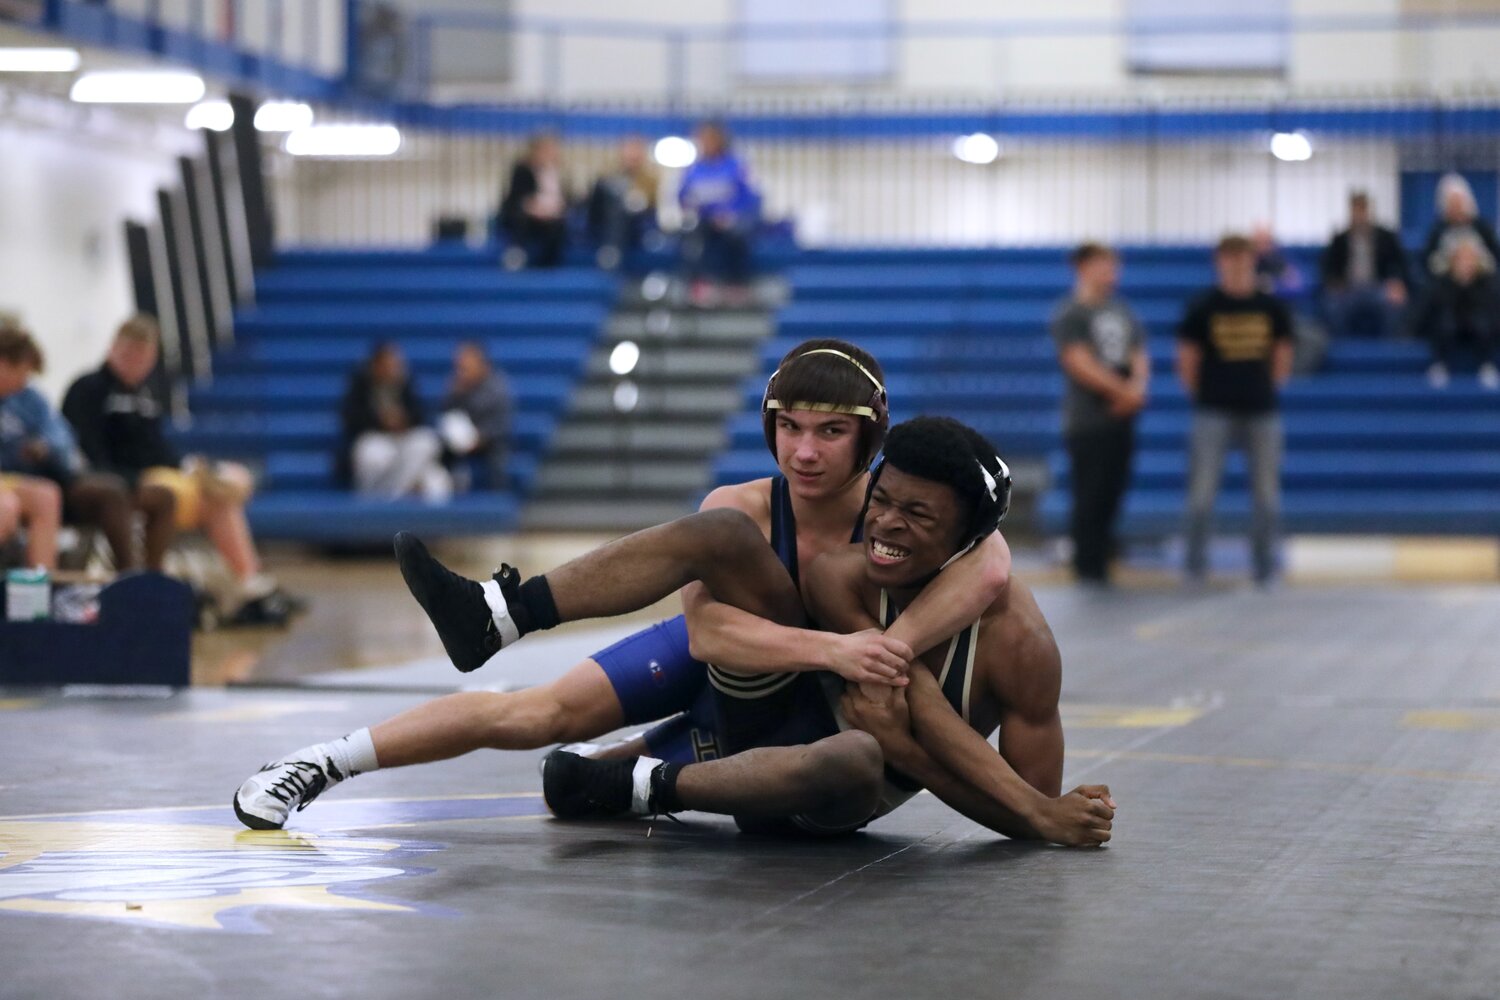 Blake Beissel got his 150th pin as a Hastings Raider on Friday night against an East Ridge opponent.